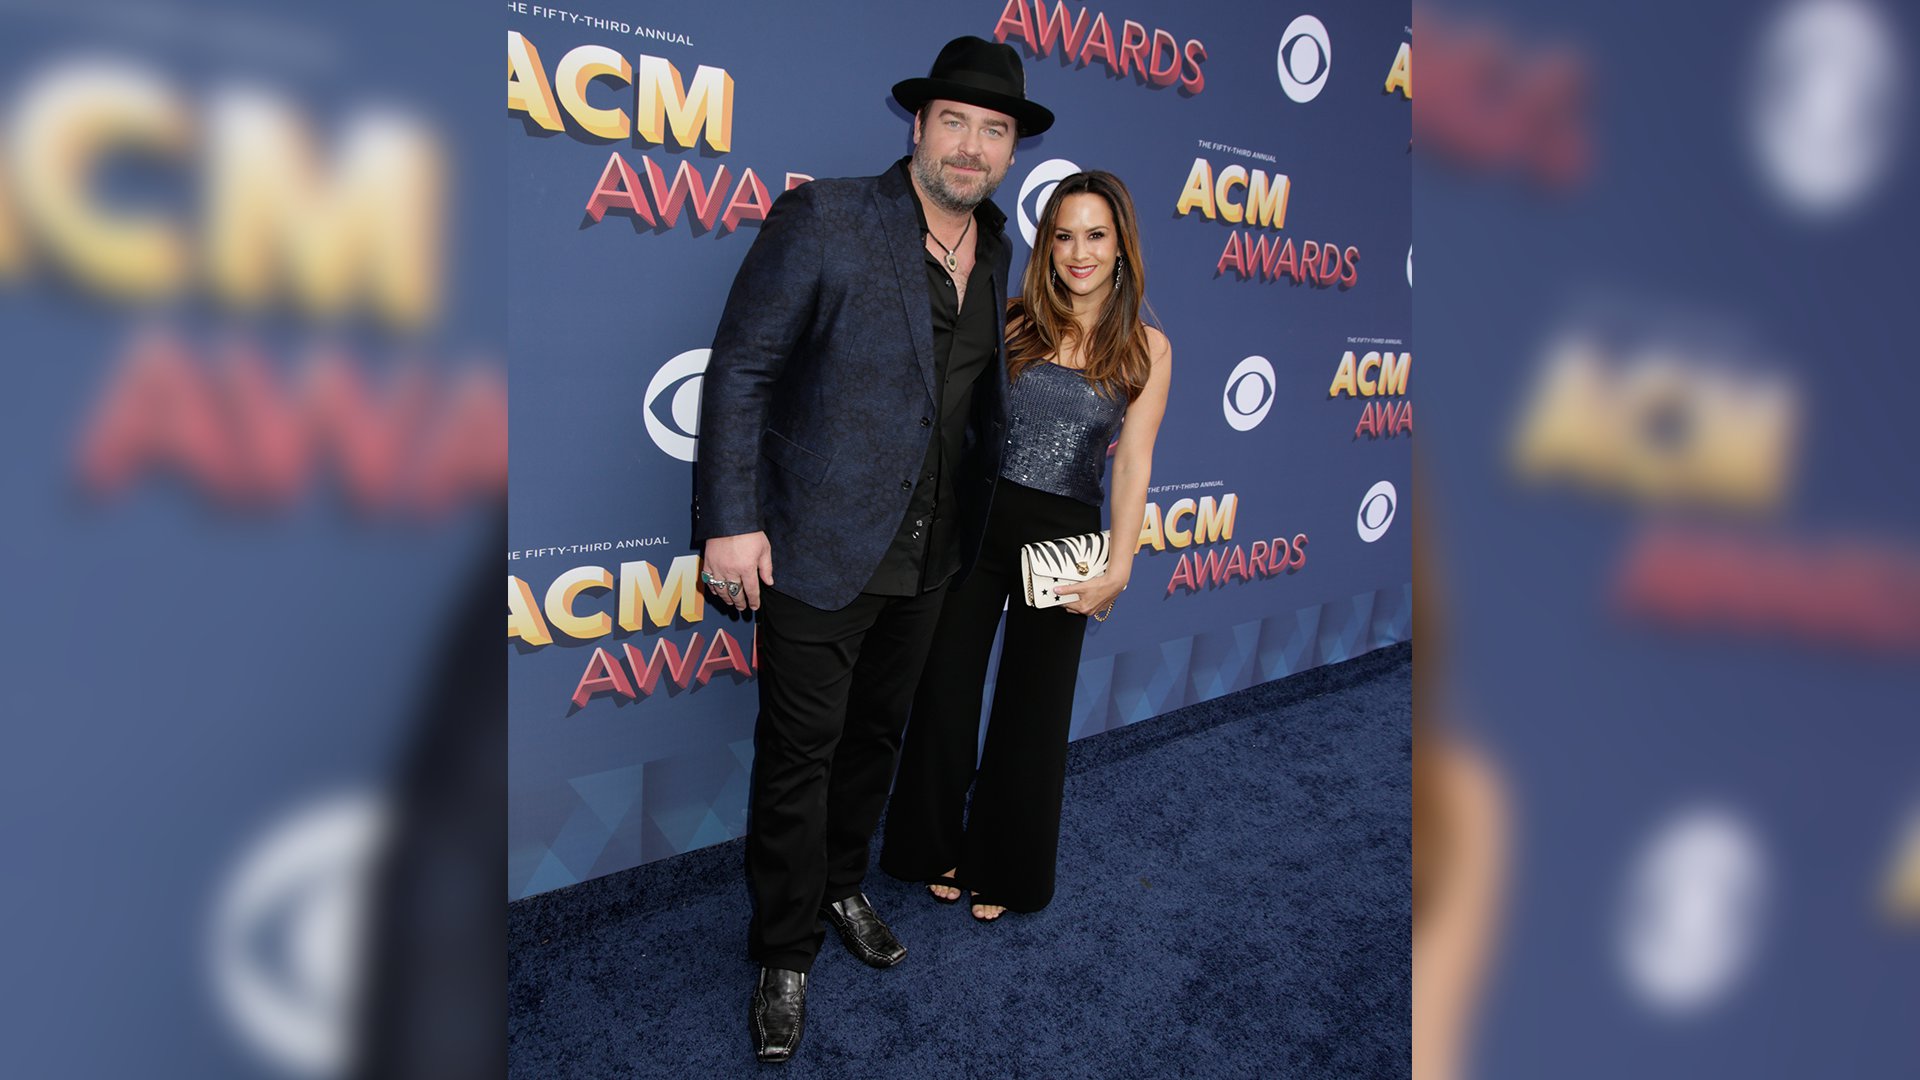 It's always great to see Lee Brice at the ACM Awards.